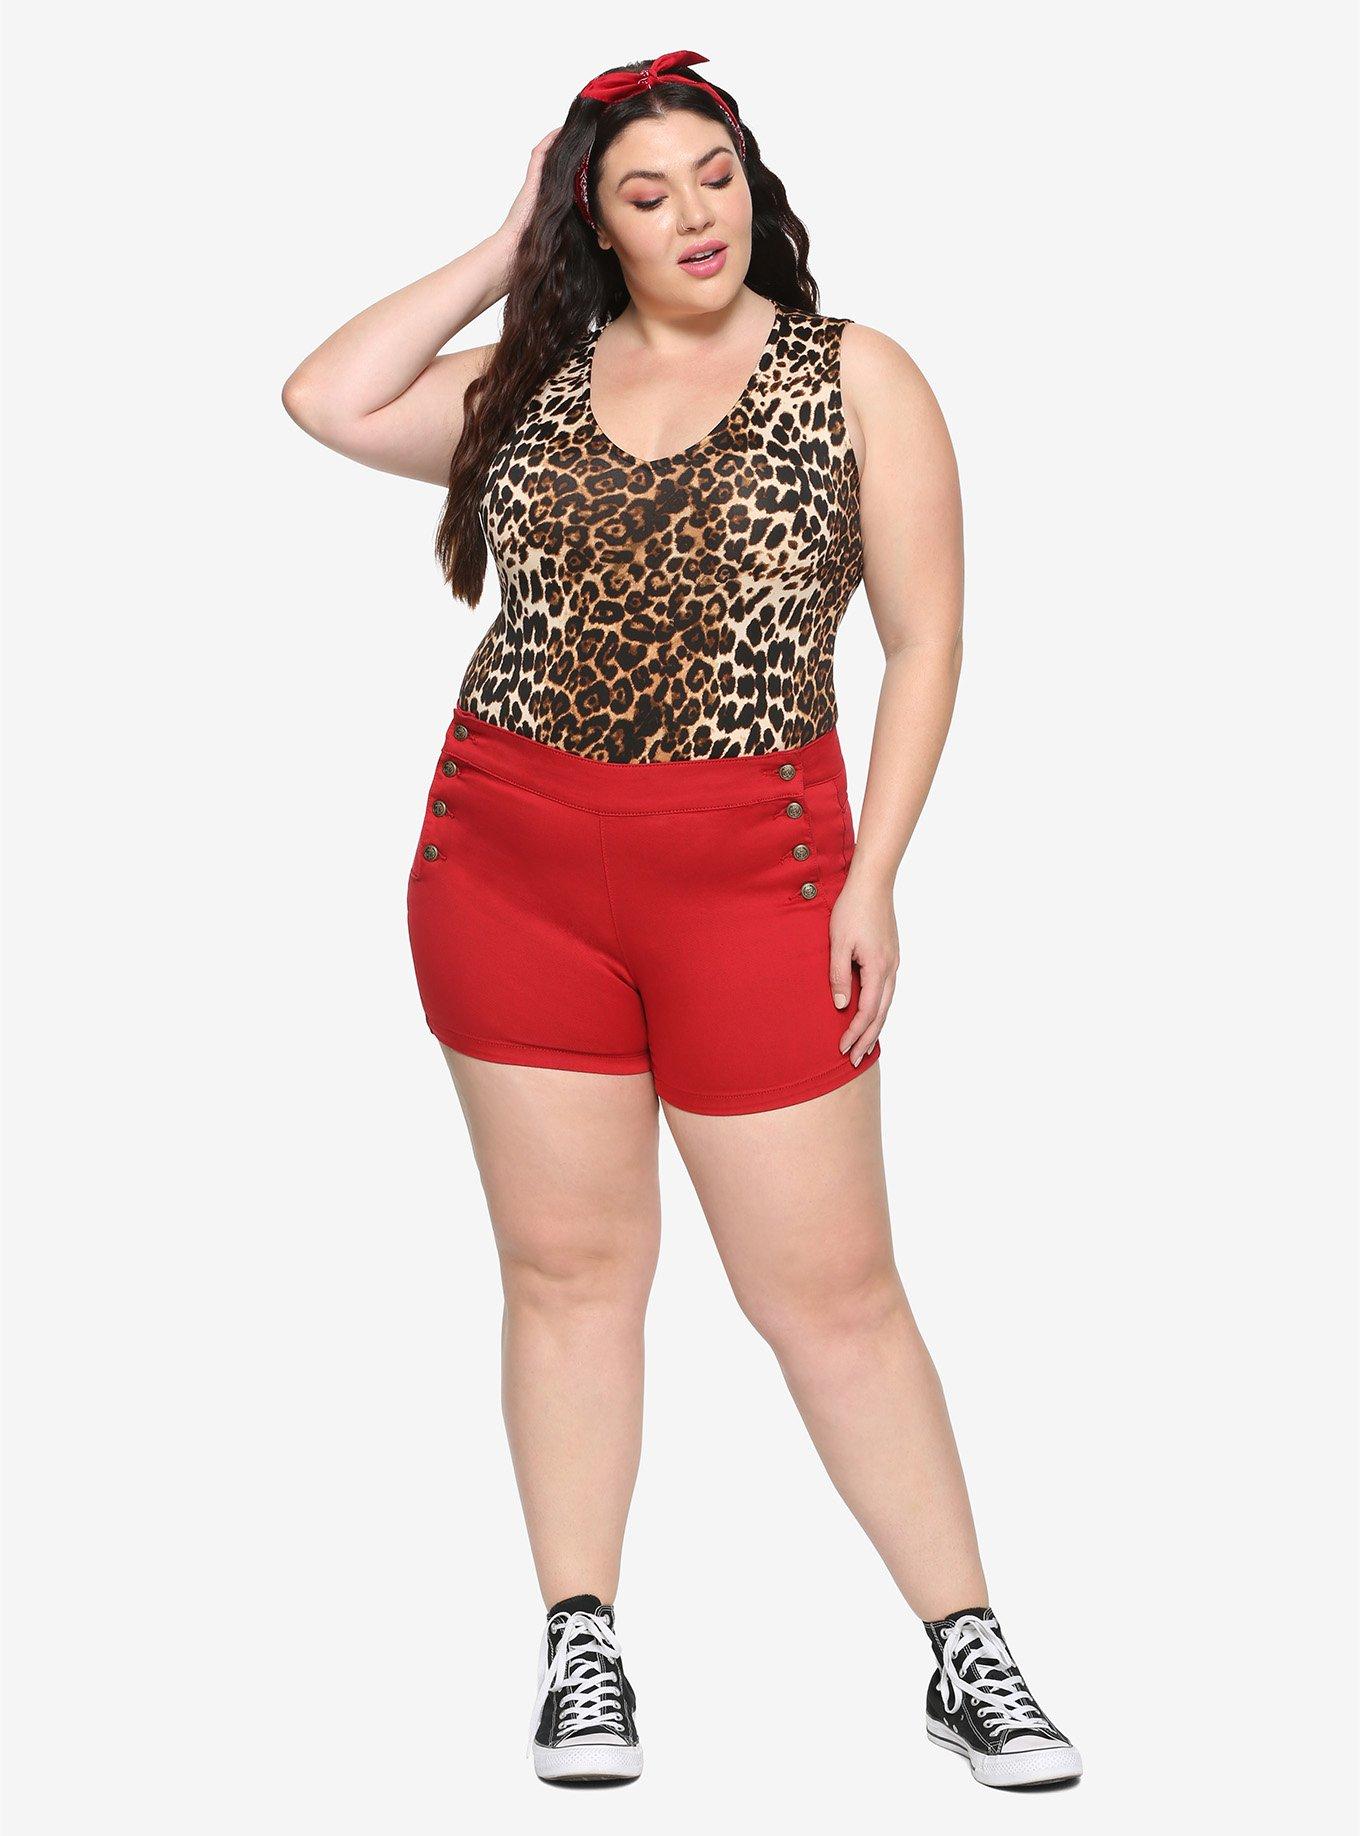 Red High-Waisted Sailor Shorts Plus Size, , alternate